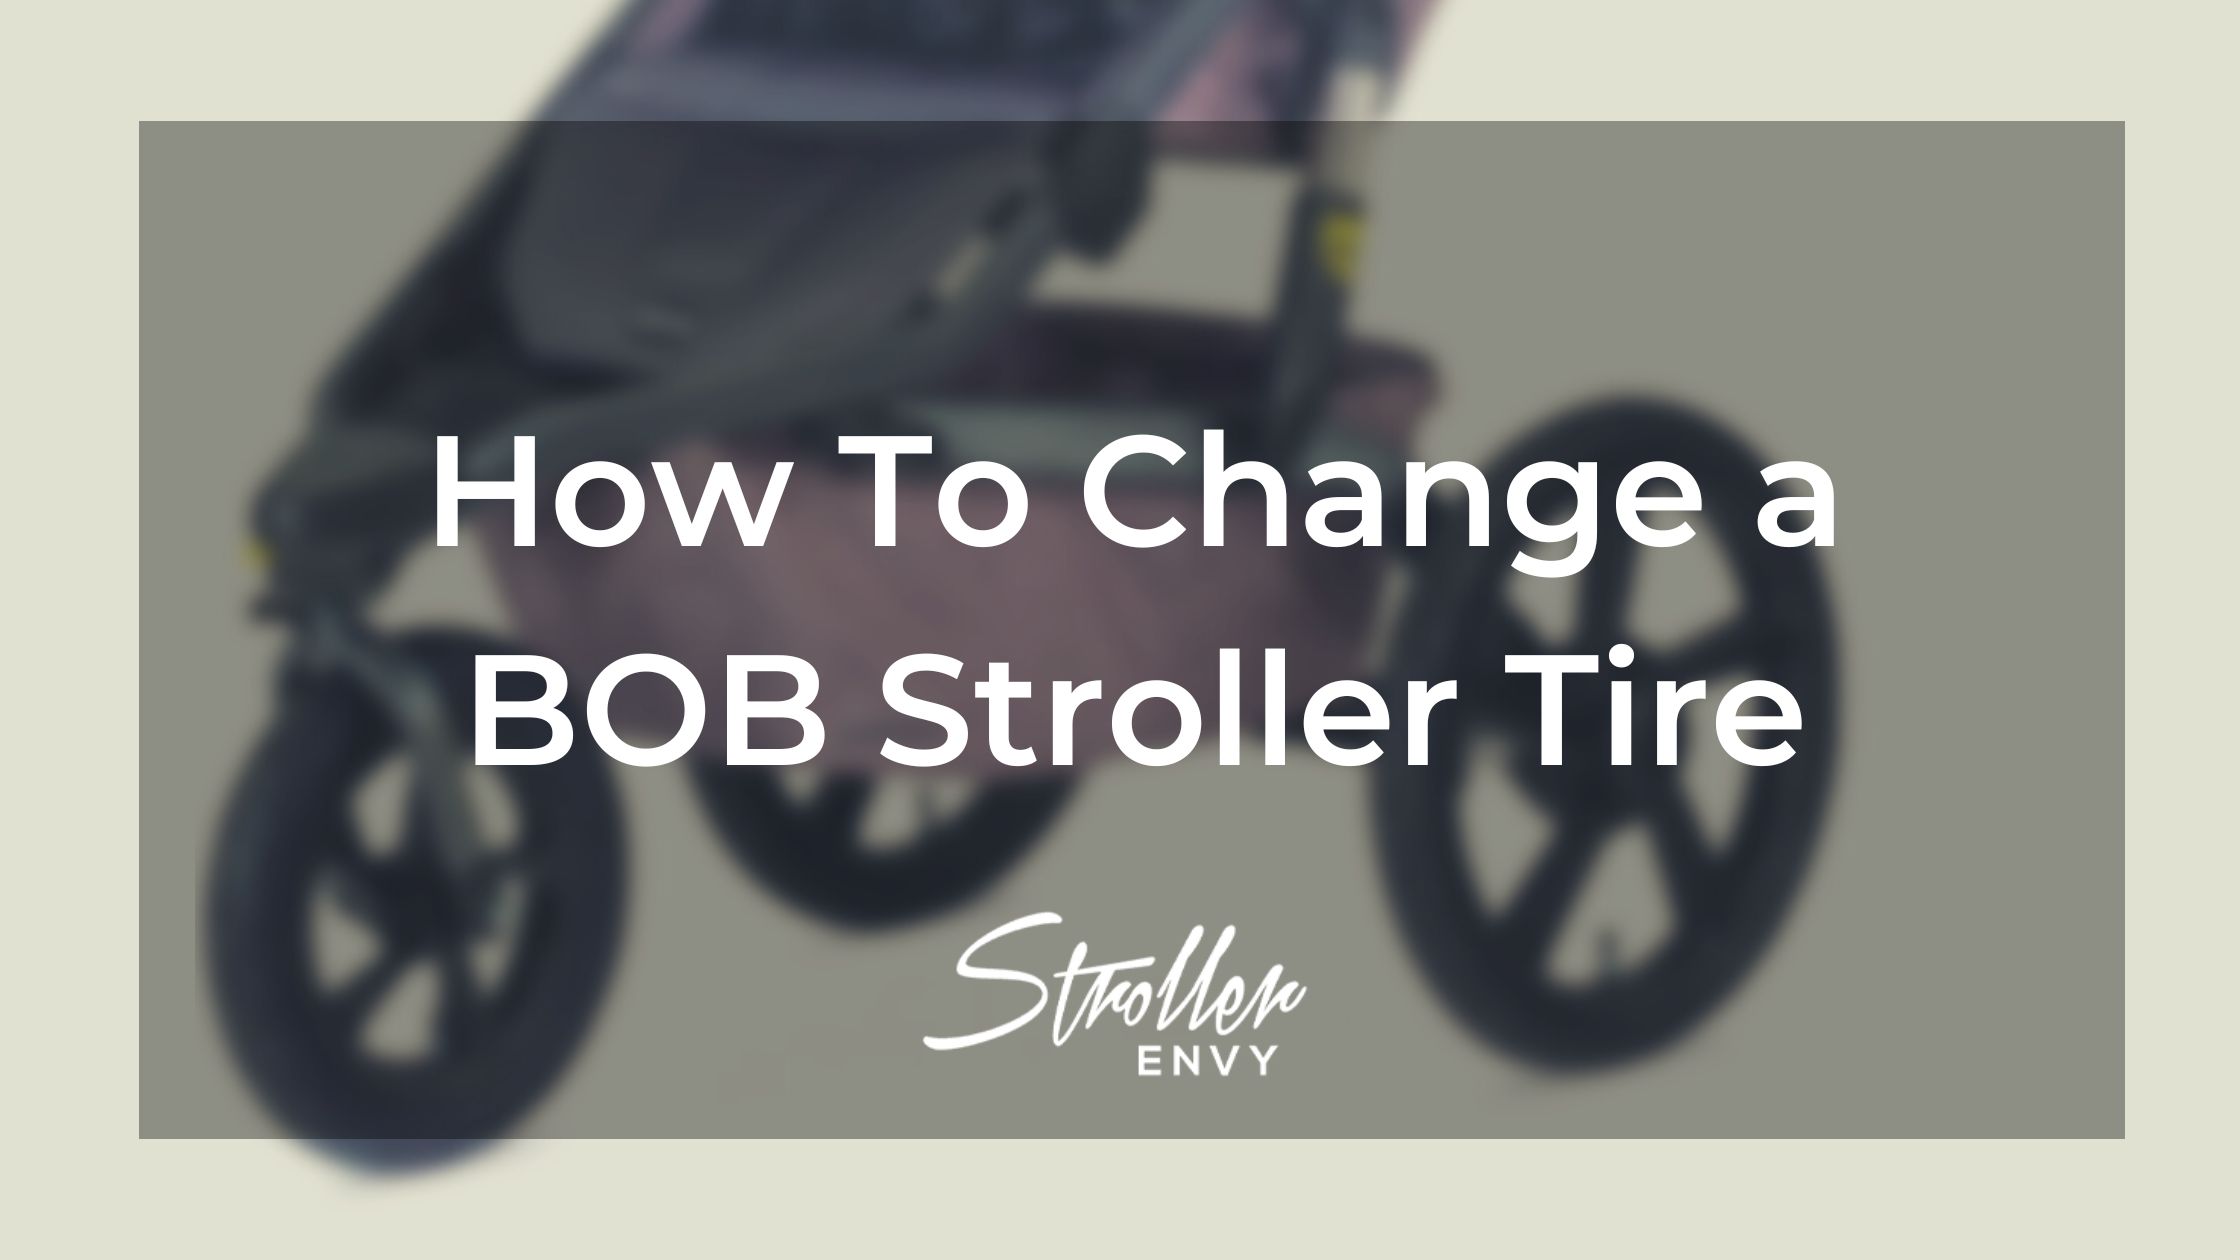 How To Change a BOB Stroller Tire